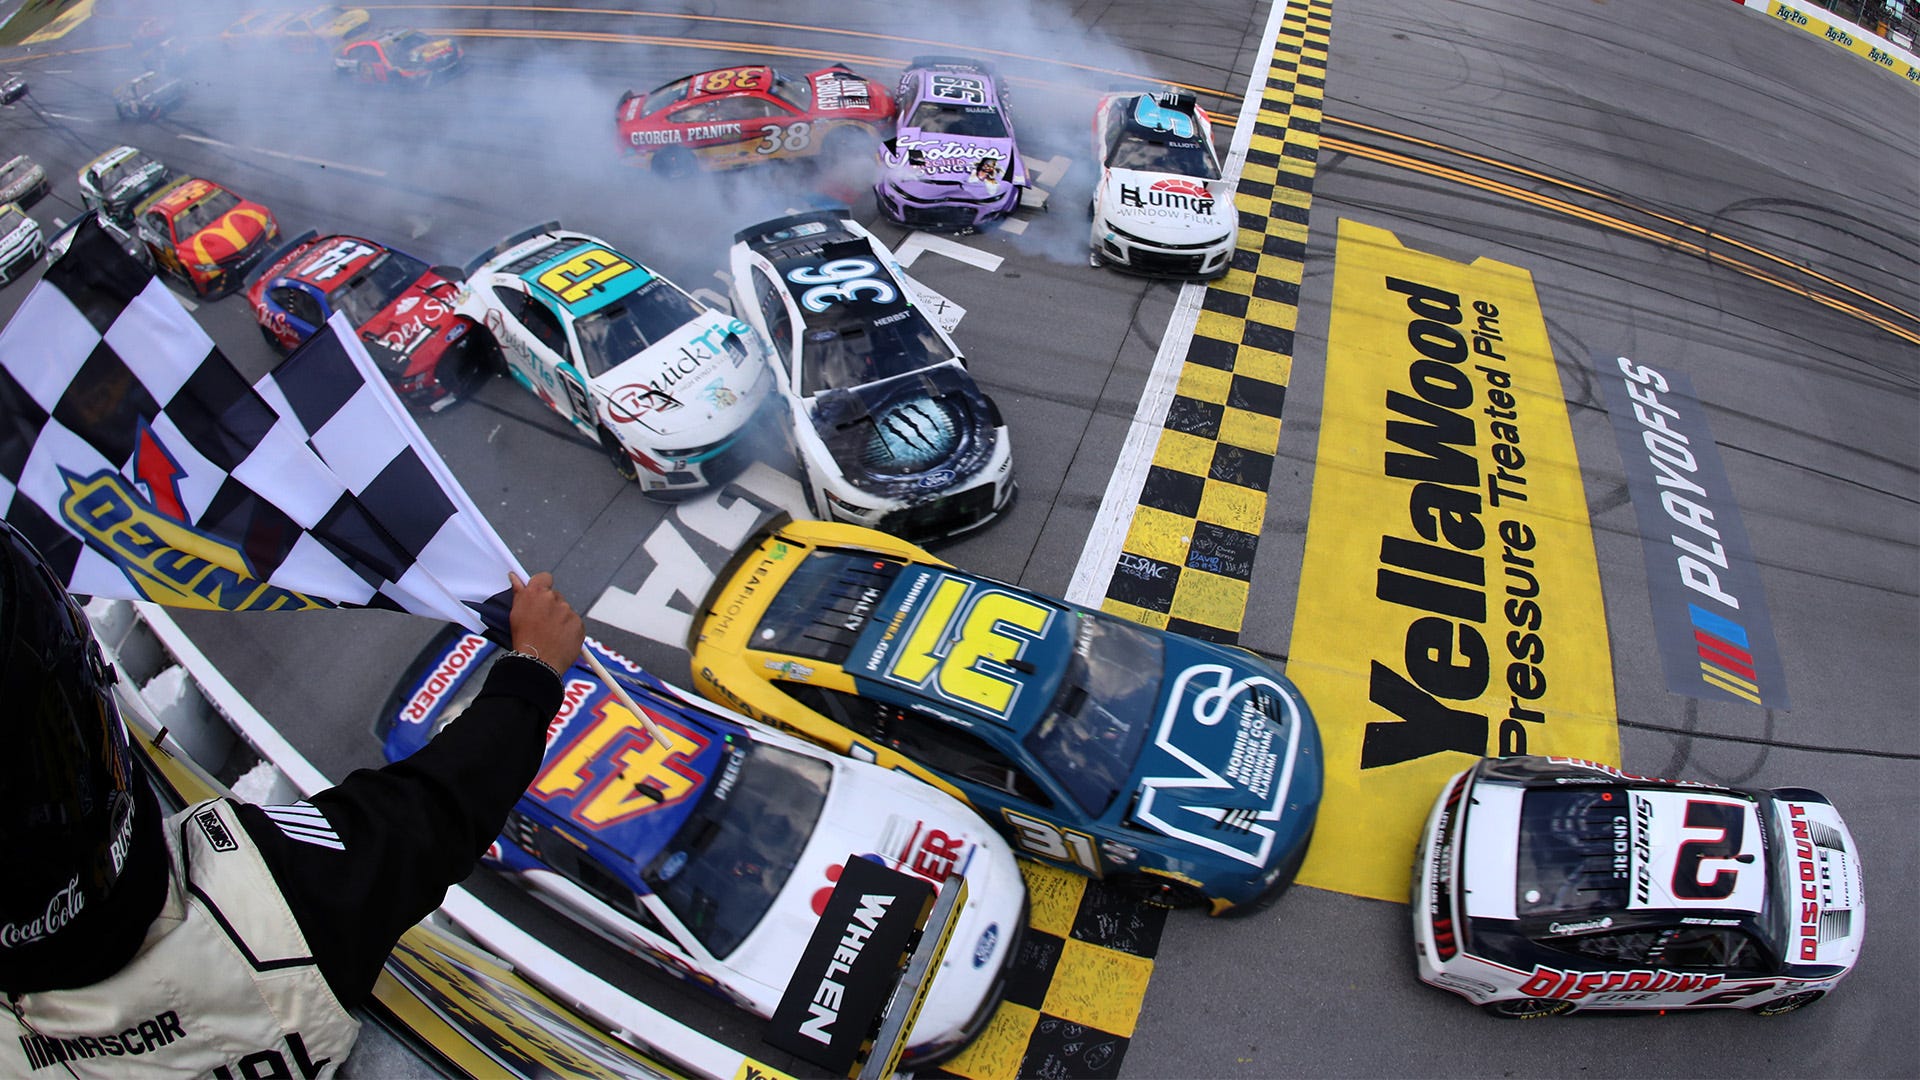 10 best places to watch a NASCAR race